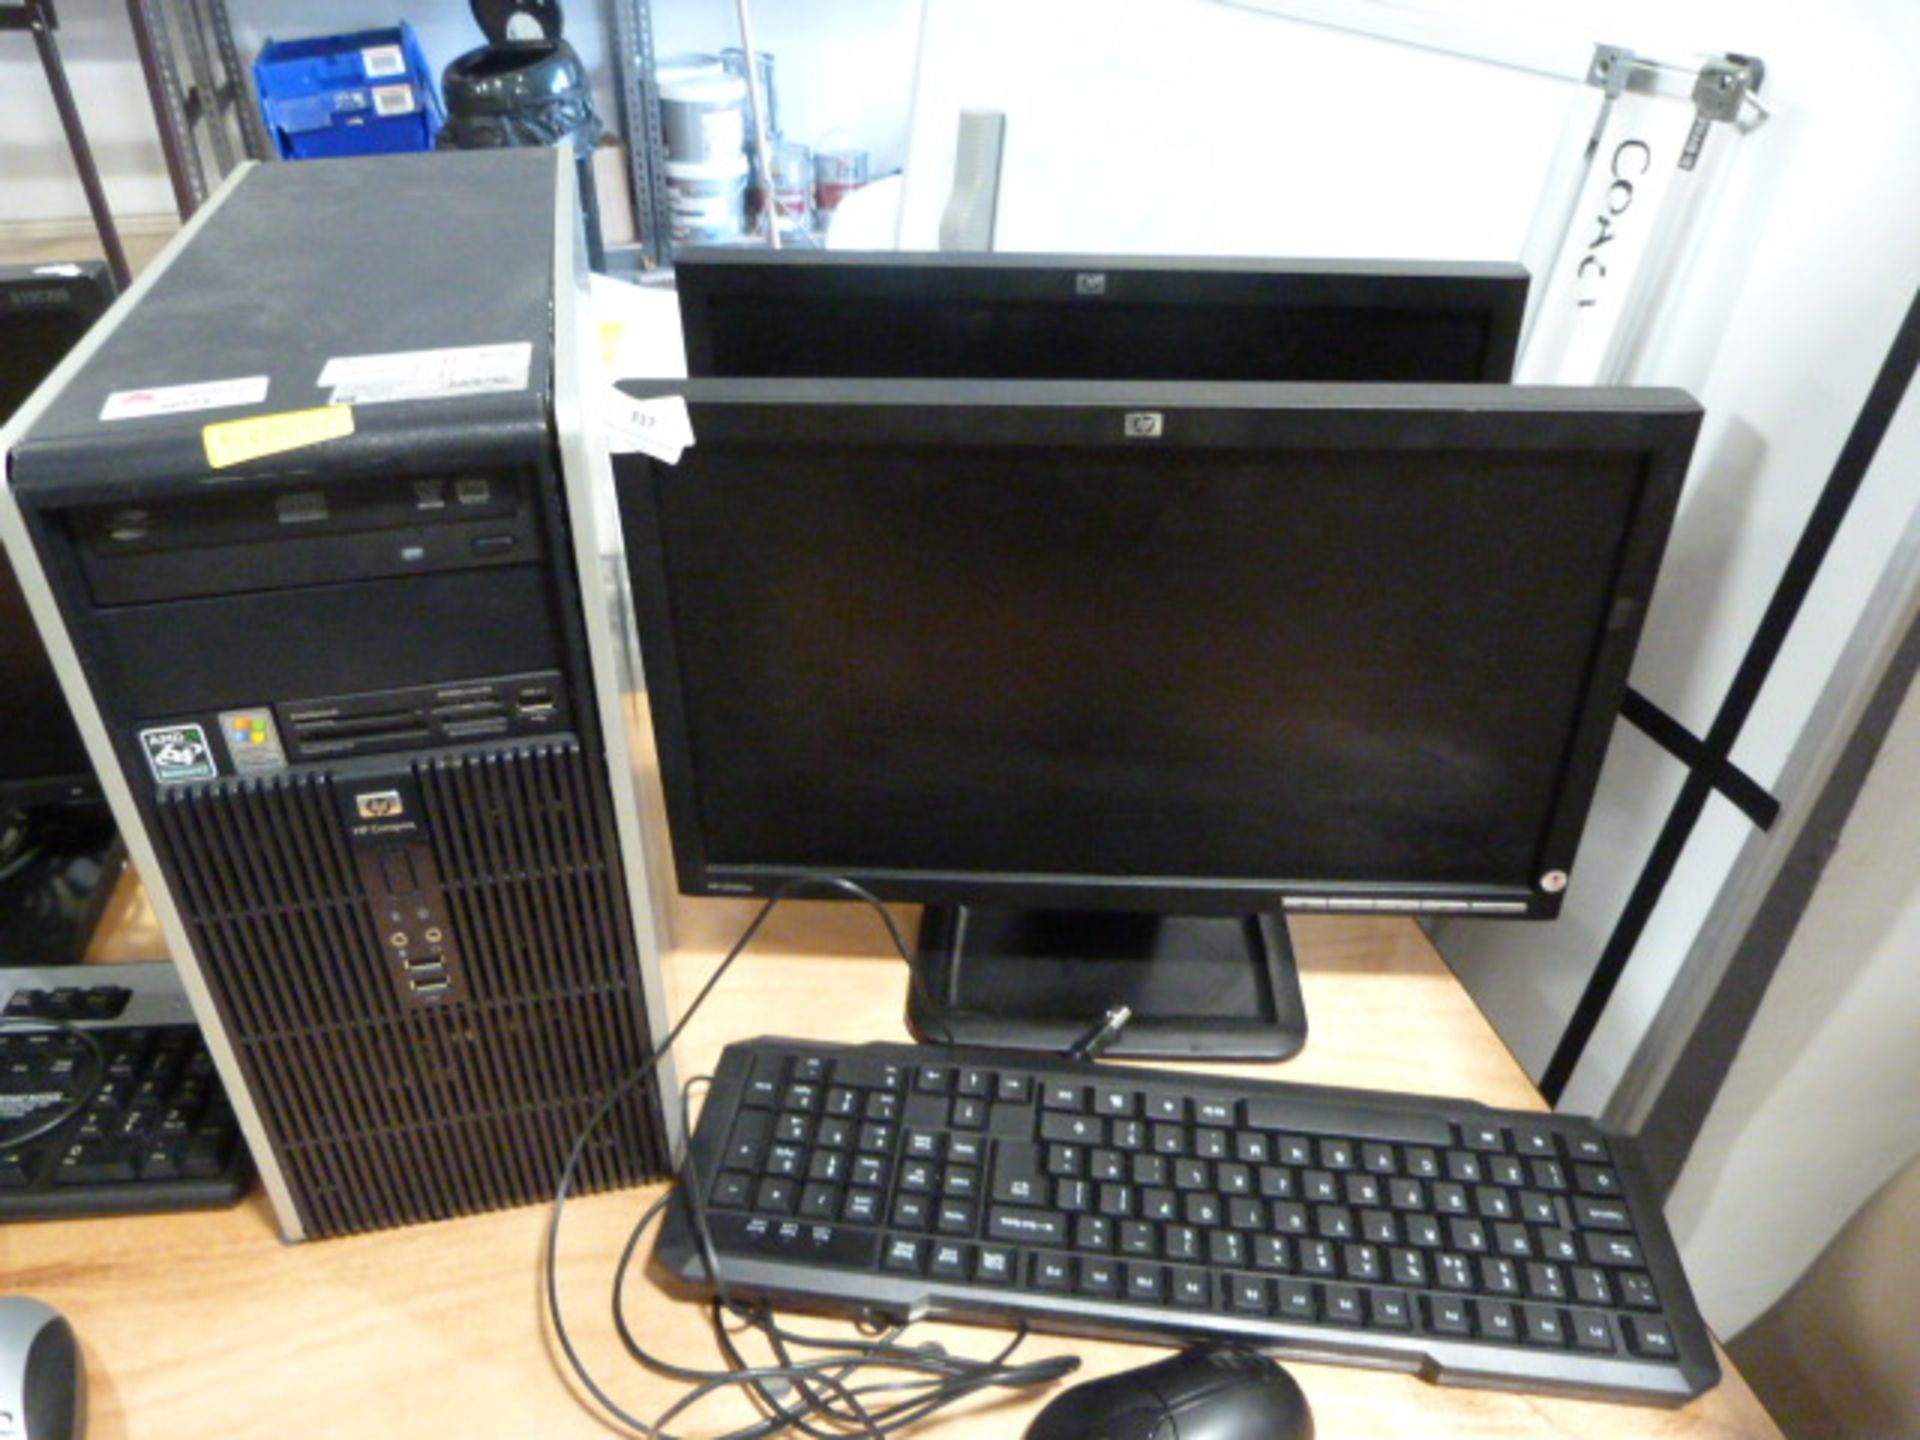 *Two HP Monitors, HP Compaq Tower PC, Keyboard and Mouse